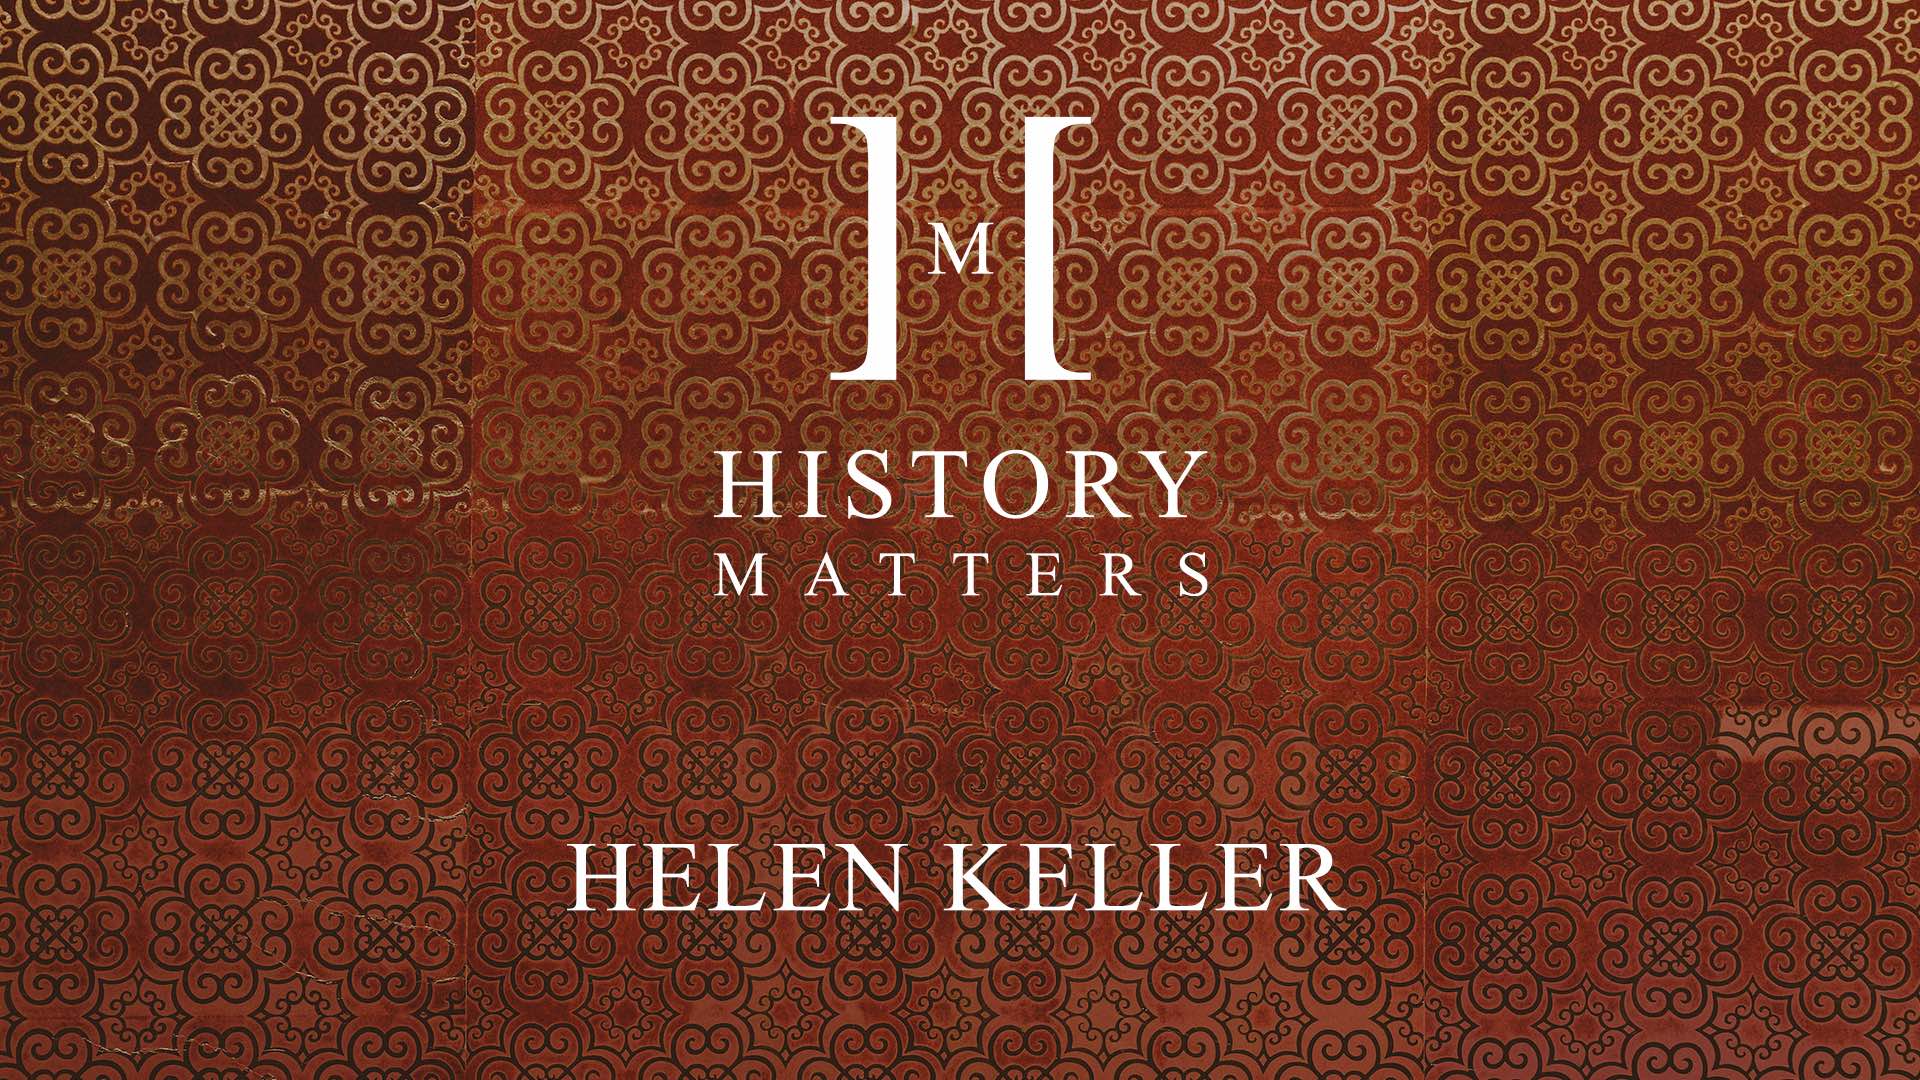 IU C&I Studios Page White HM Helen Keller logo with background of red patterned tiles